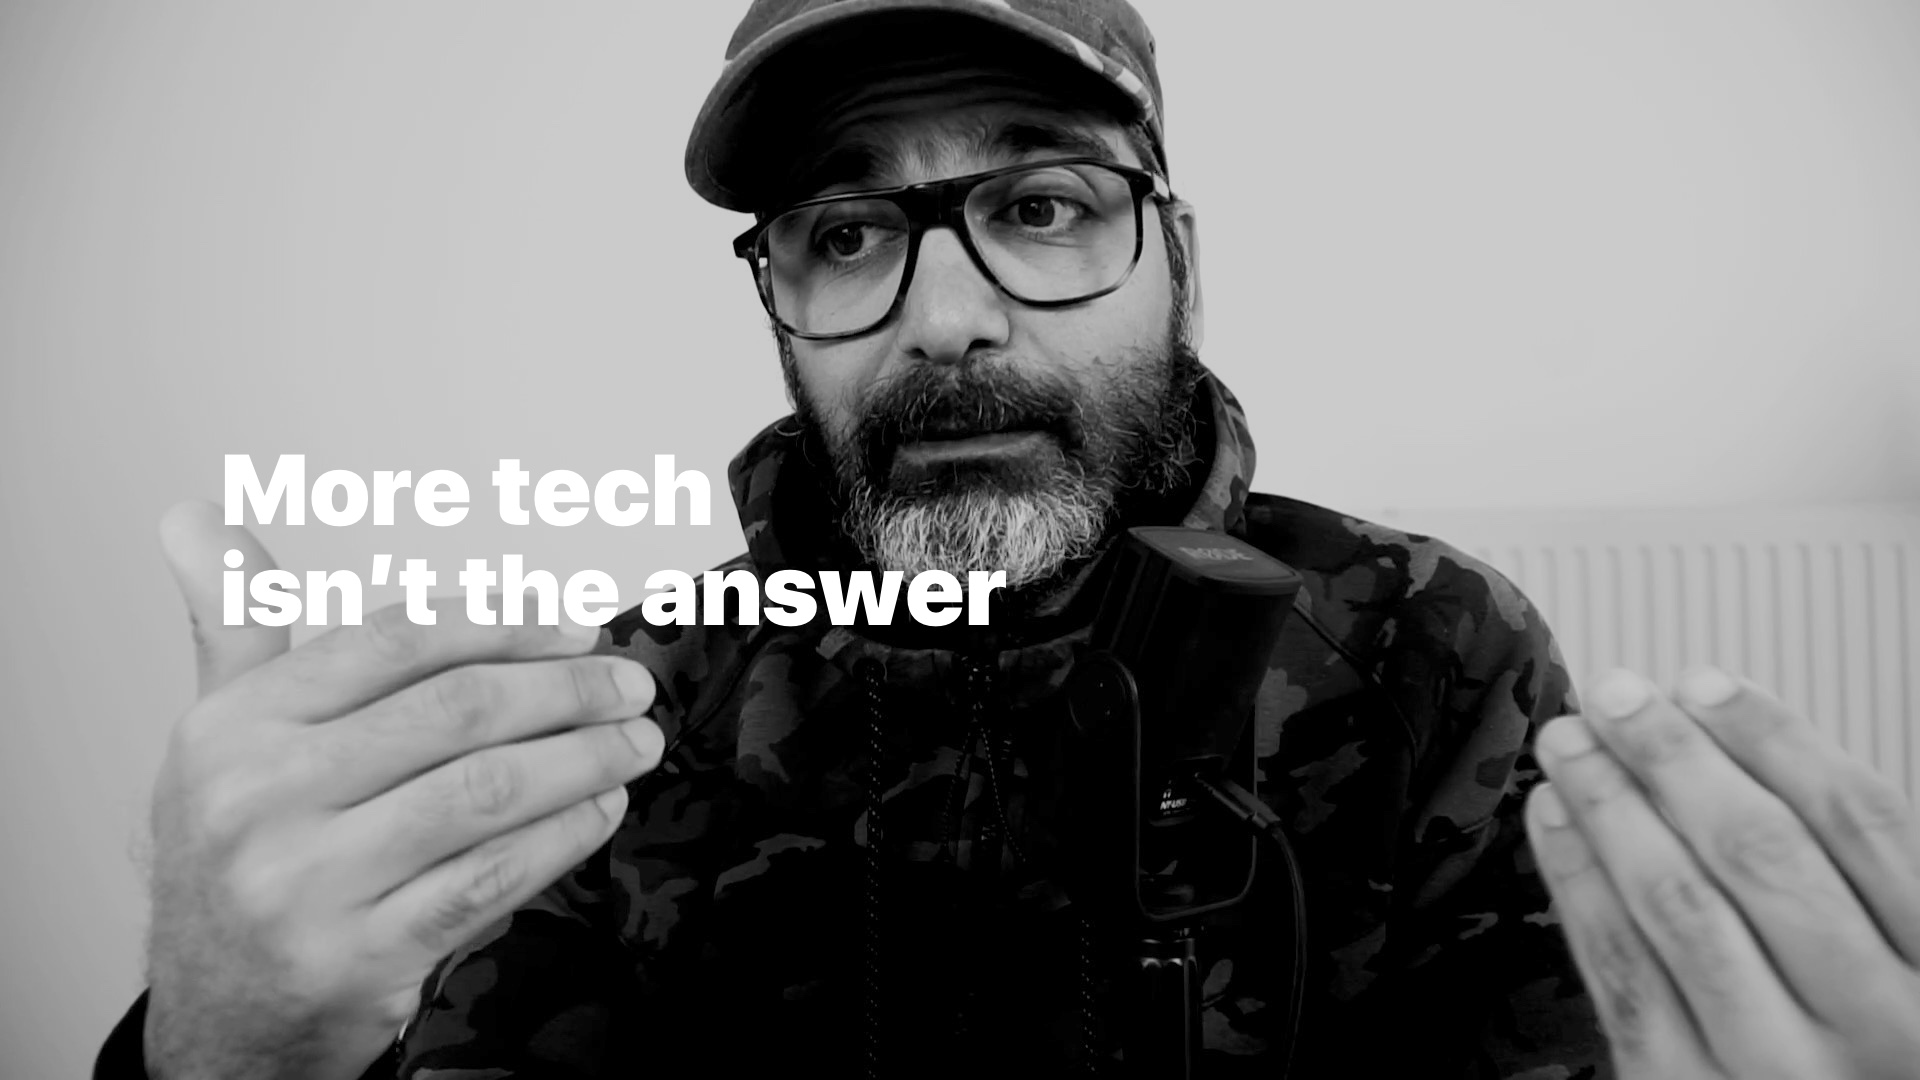 More tech isn’t the answer